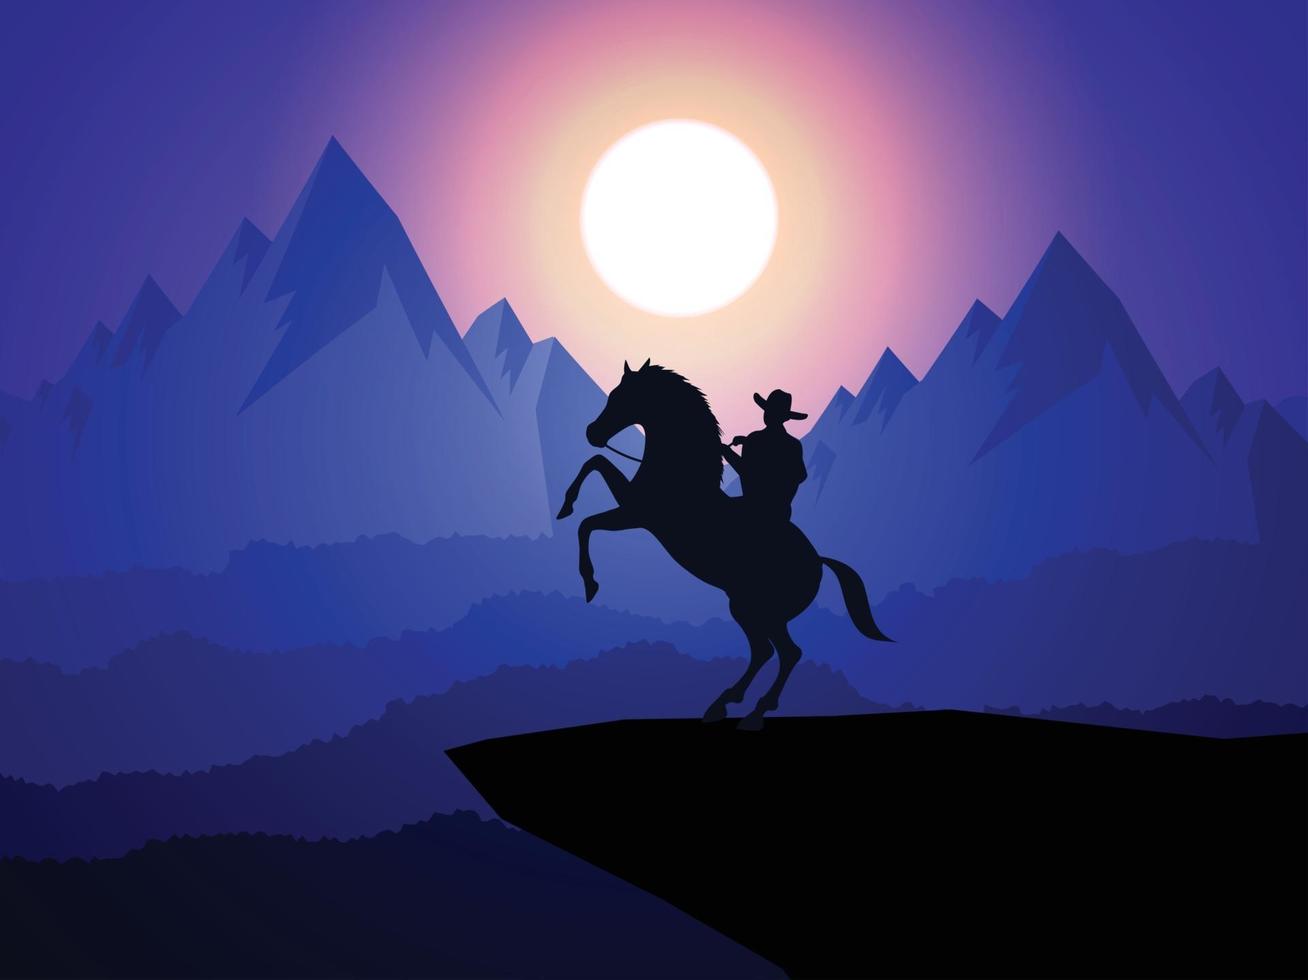 American Cowboy with horse Wild West Moon night landscape background vector